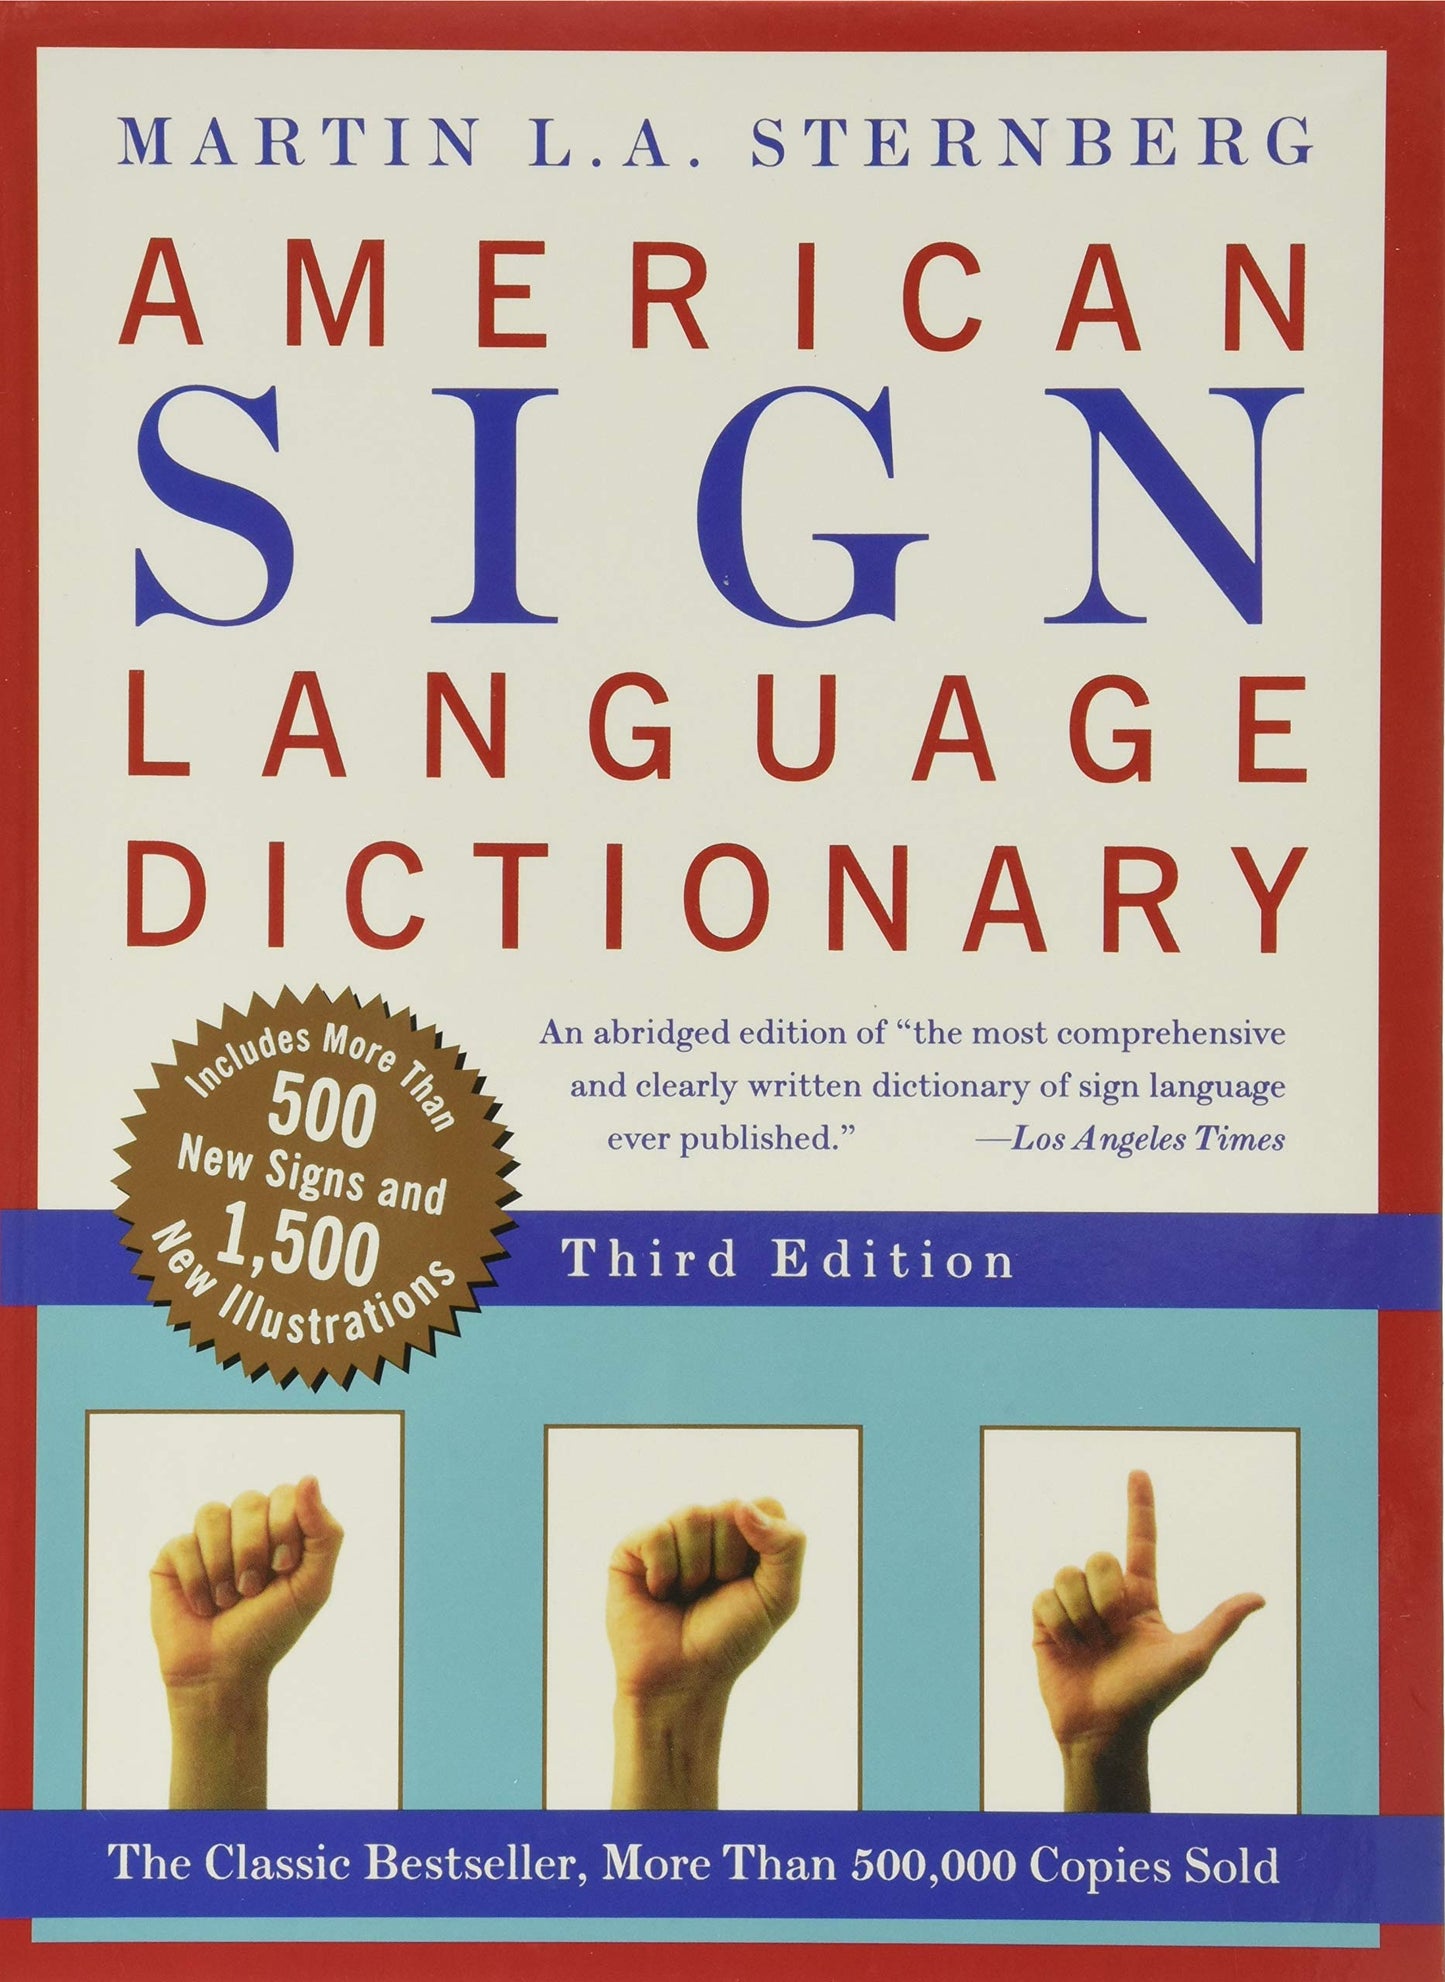 American Sign Language Dictionary, Third Edition by Martin L. A. Sternberg - Dead Tree Dreams Bookstore